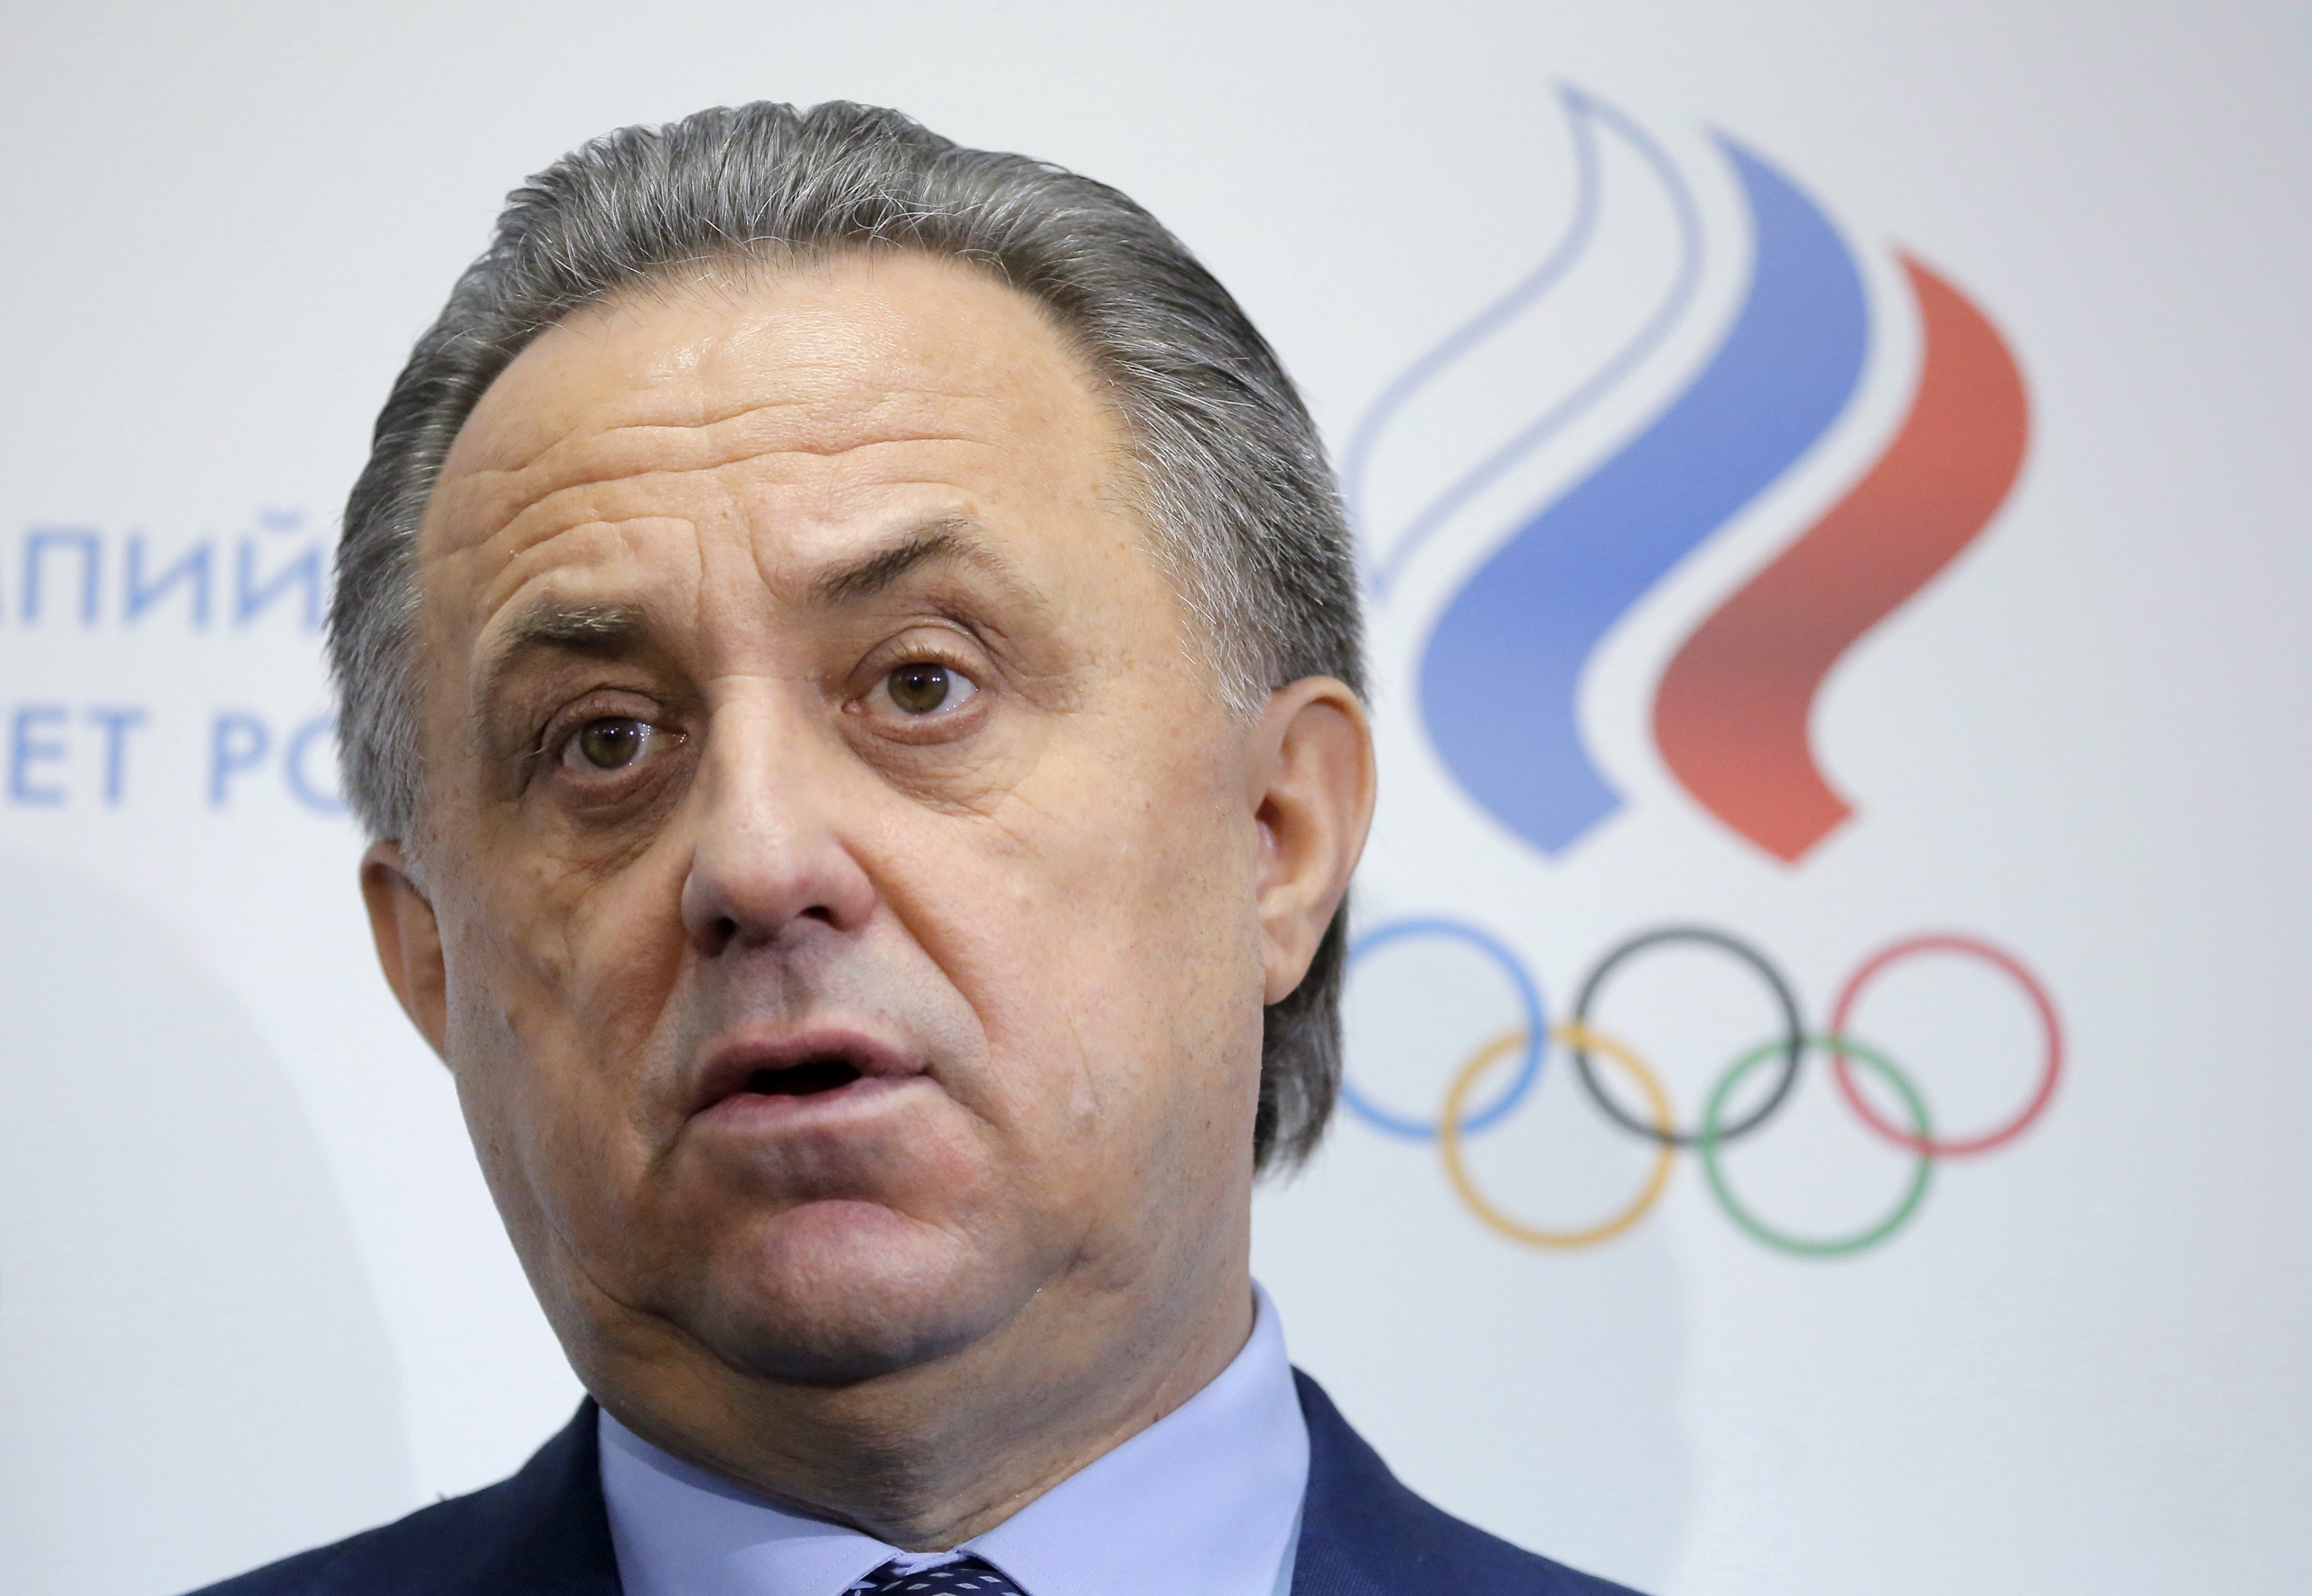 Russian Sports Minister Mutko speaks to media during news conference following meeting held to hear reports and elect new officials of Russia's Athletics Federation in Moscow